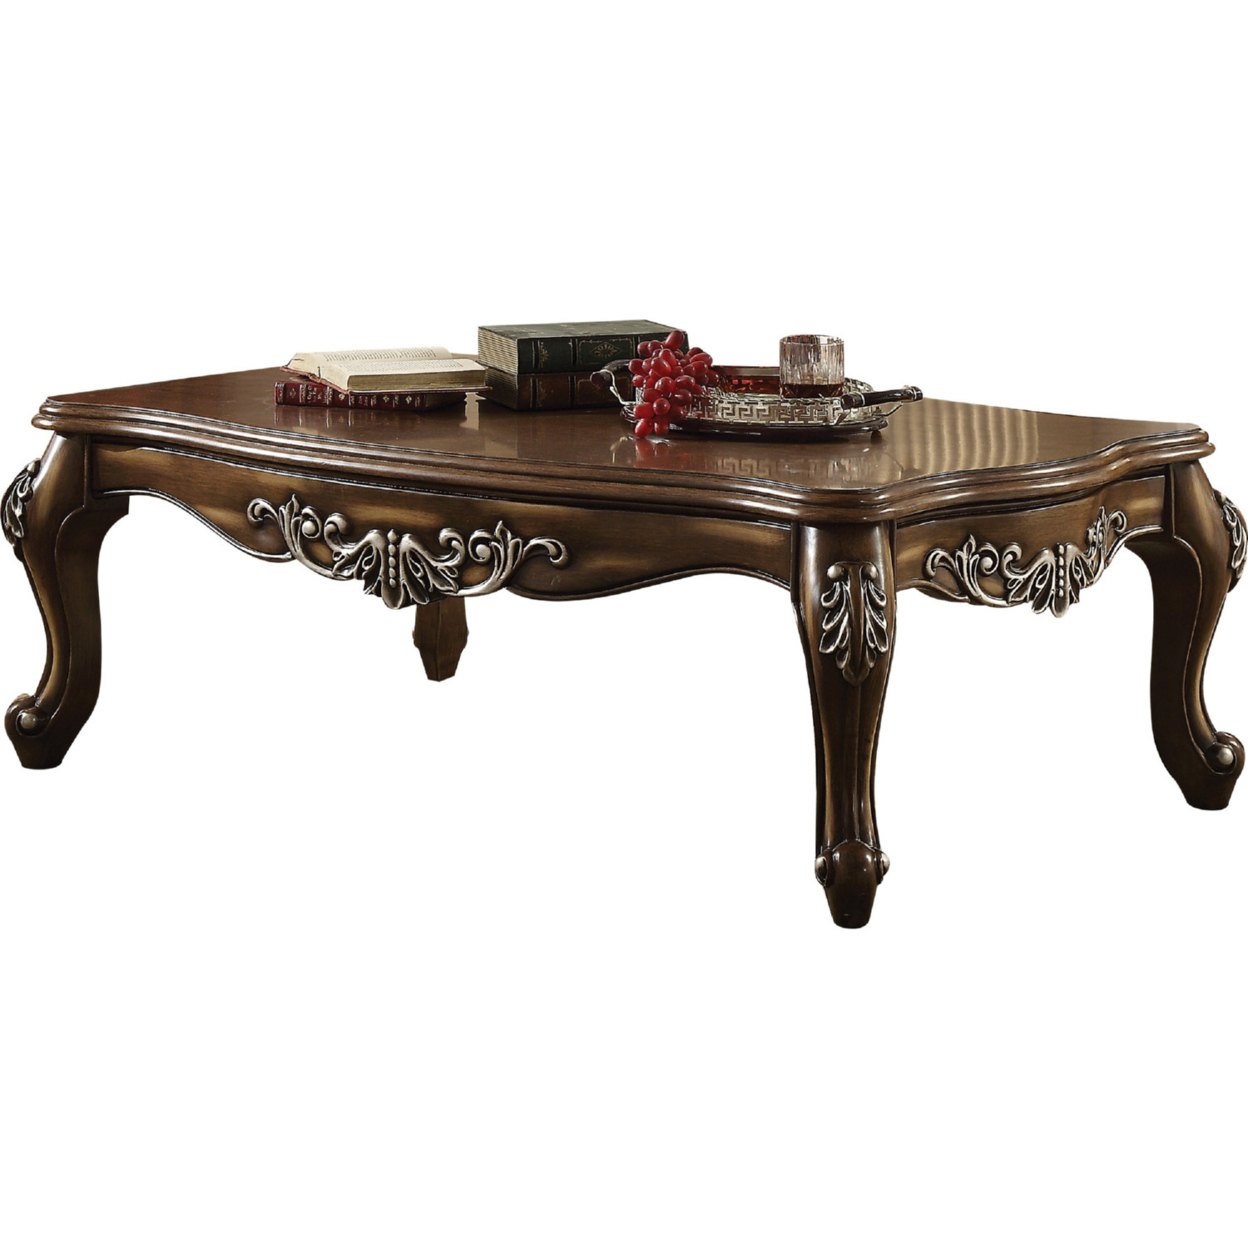 Intricately Carved Wooden Coffee Table In Antique Oak Brown- Saltoro Sherpi